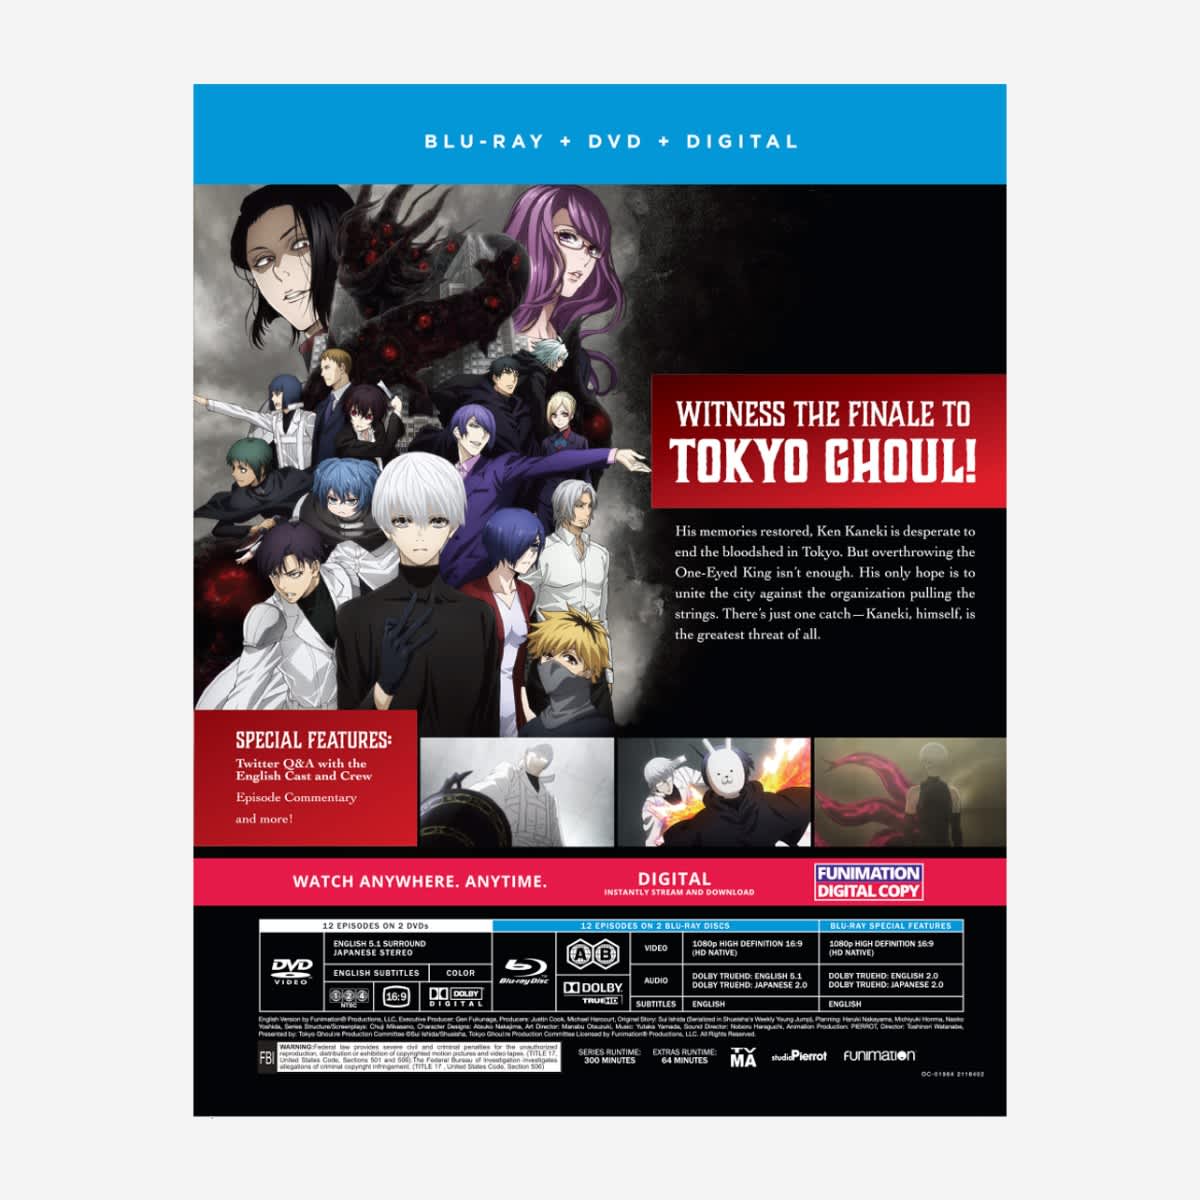 Tokyo Ghoul – Season 2 Collector's Edition Blu-ray Details